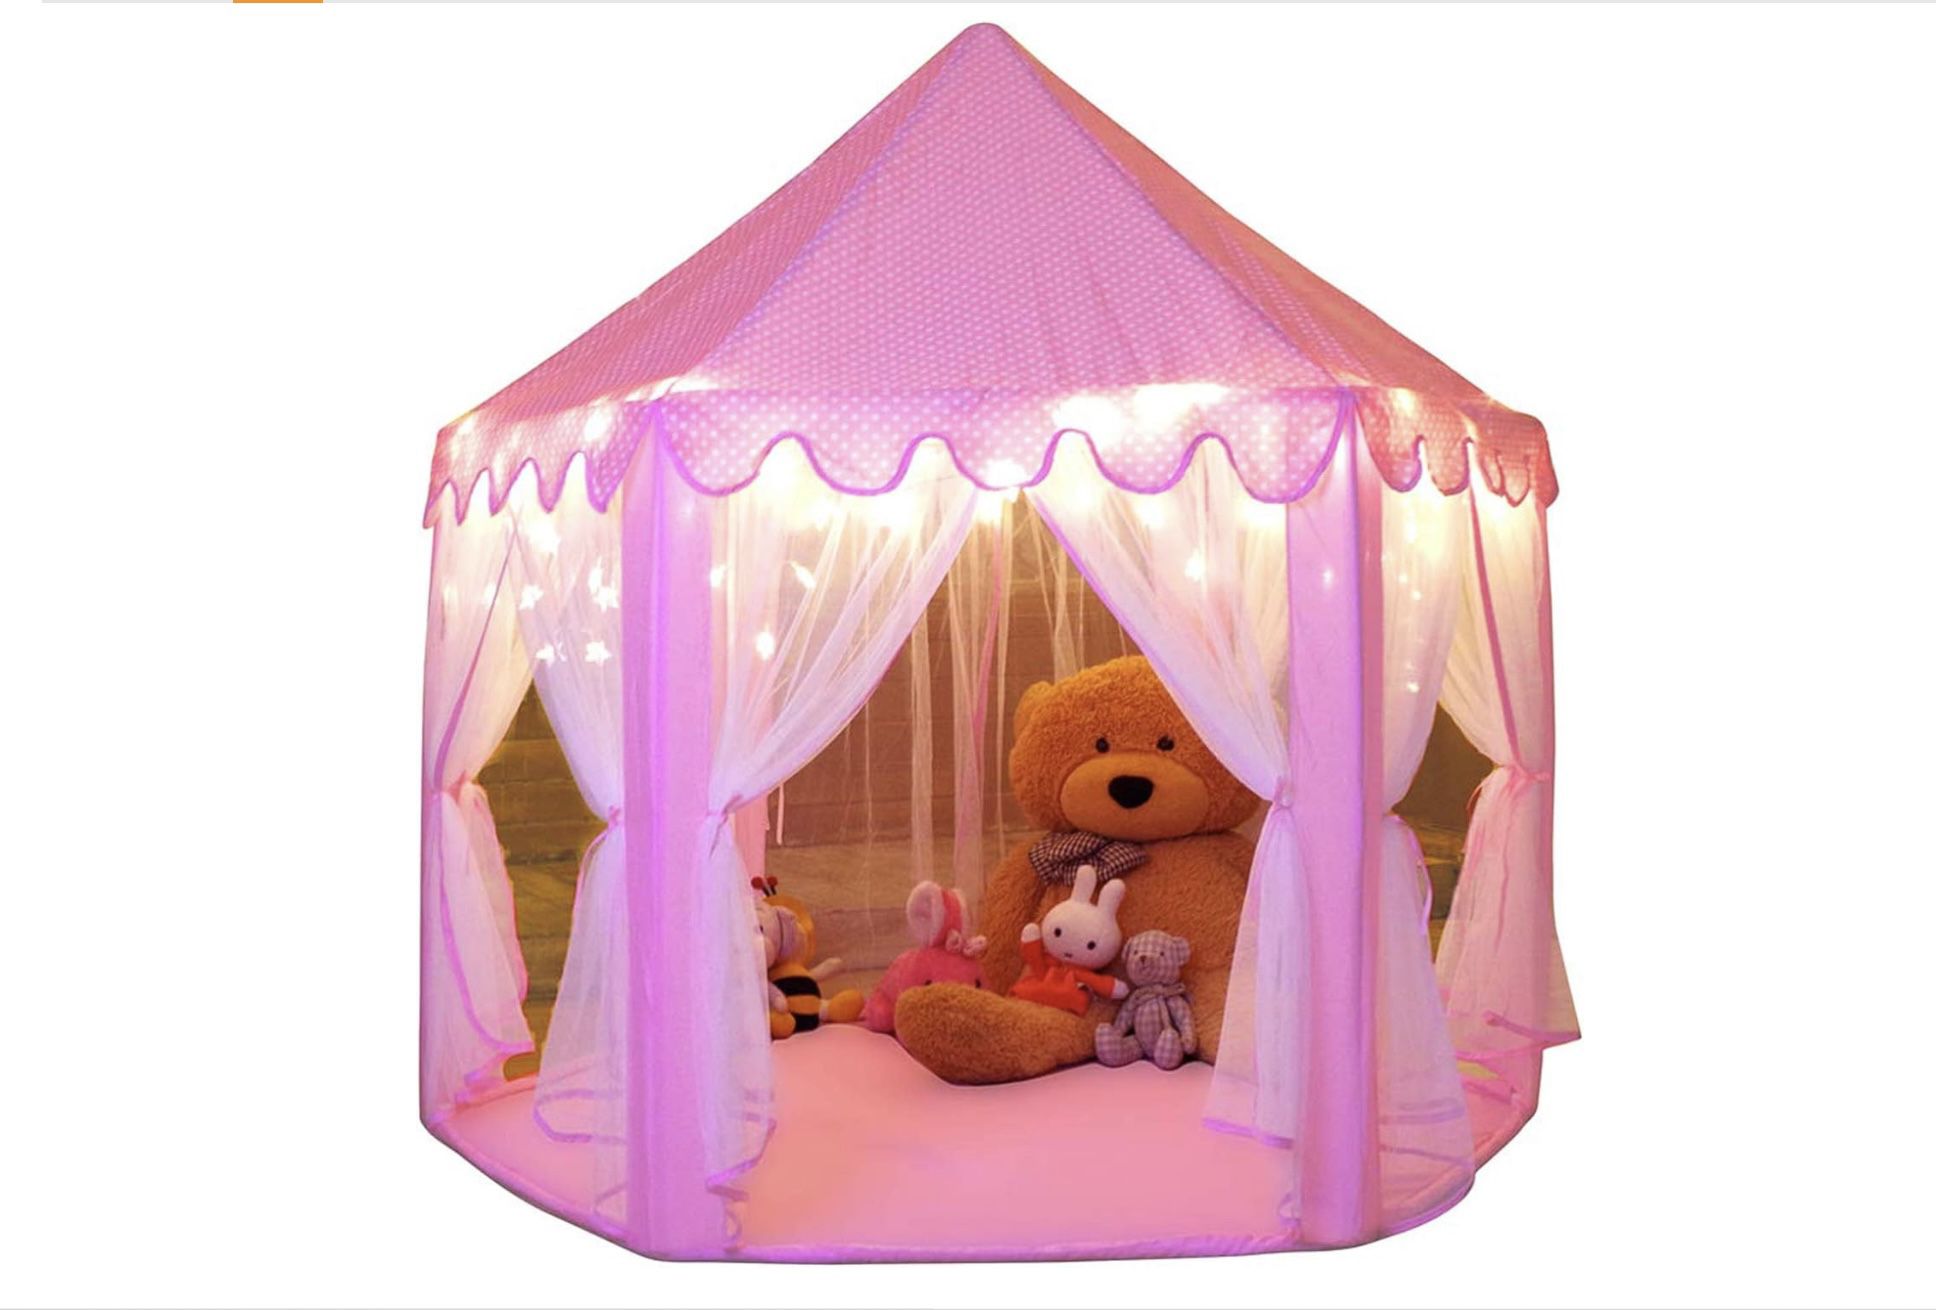 Monobeach Princess Tent Girls Large Playhouse Kids Castle Play Tent with Star Lights 